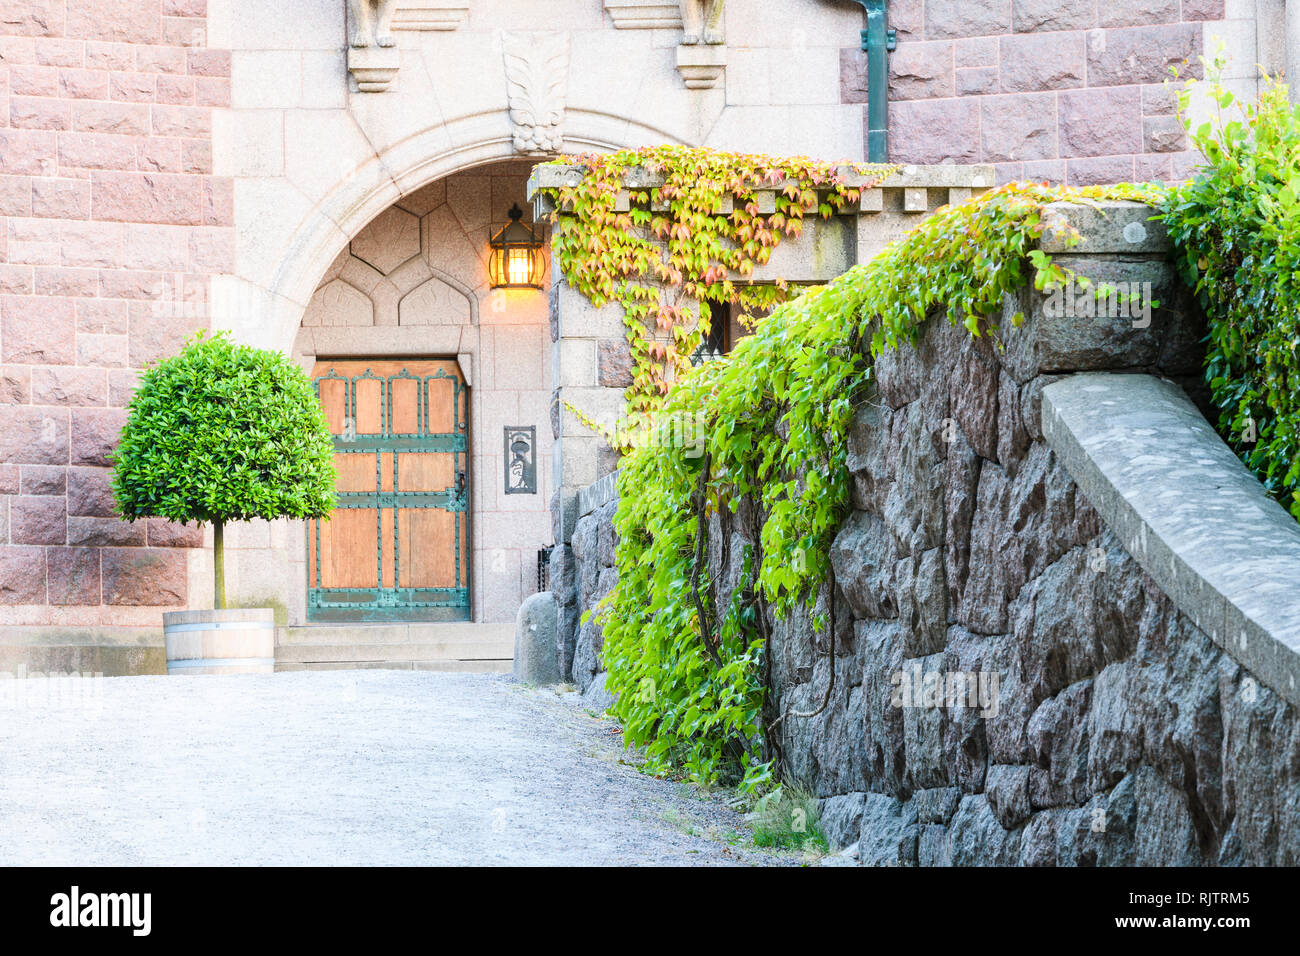 Exterior view of illuminated entrance leading to grand historic building, Halland, Sweden, Europe Stock Photo